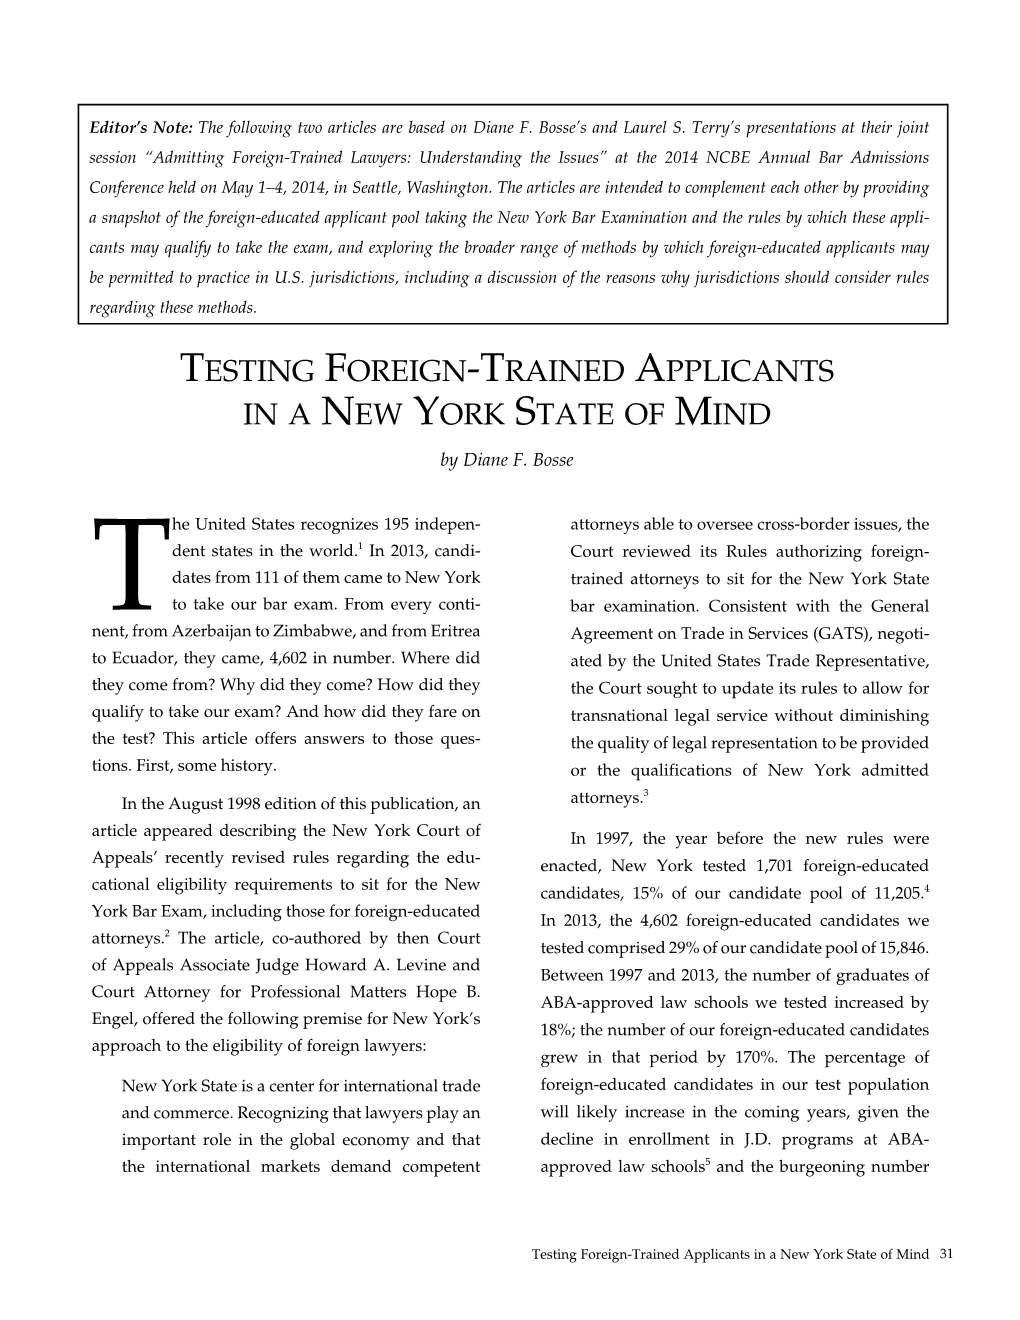 Testing Foreign-Trained Applicants in a New York State of Mind by Diane F